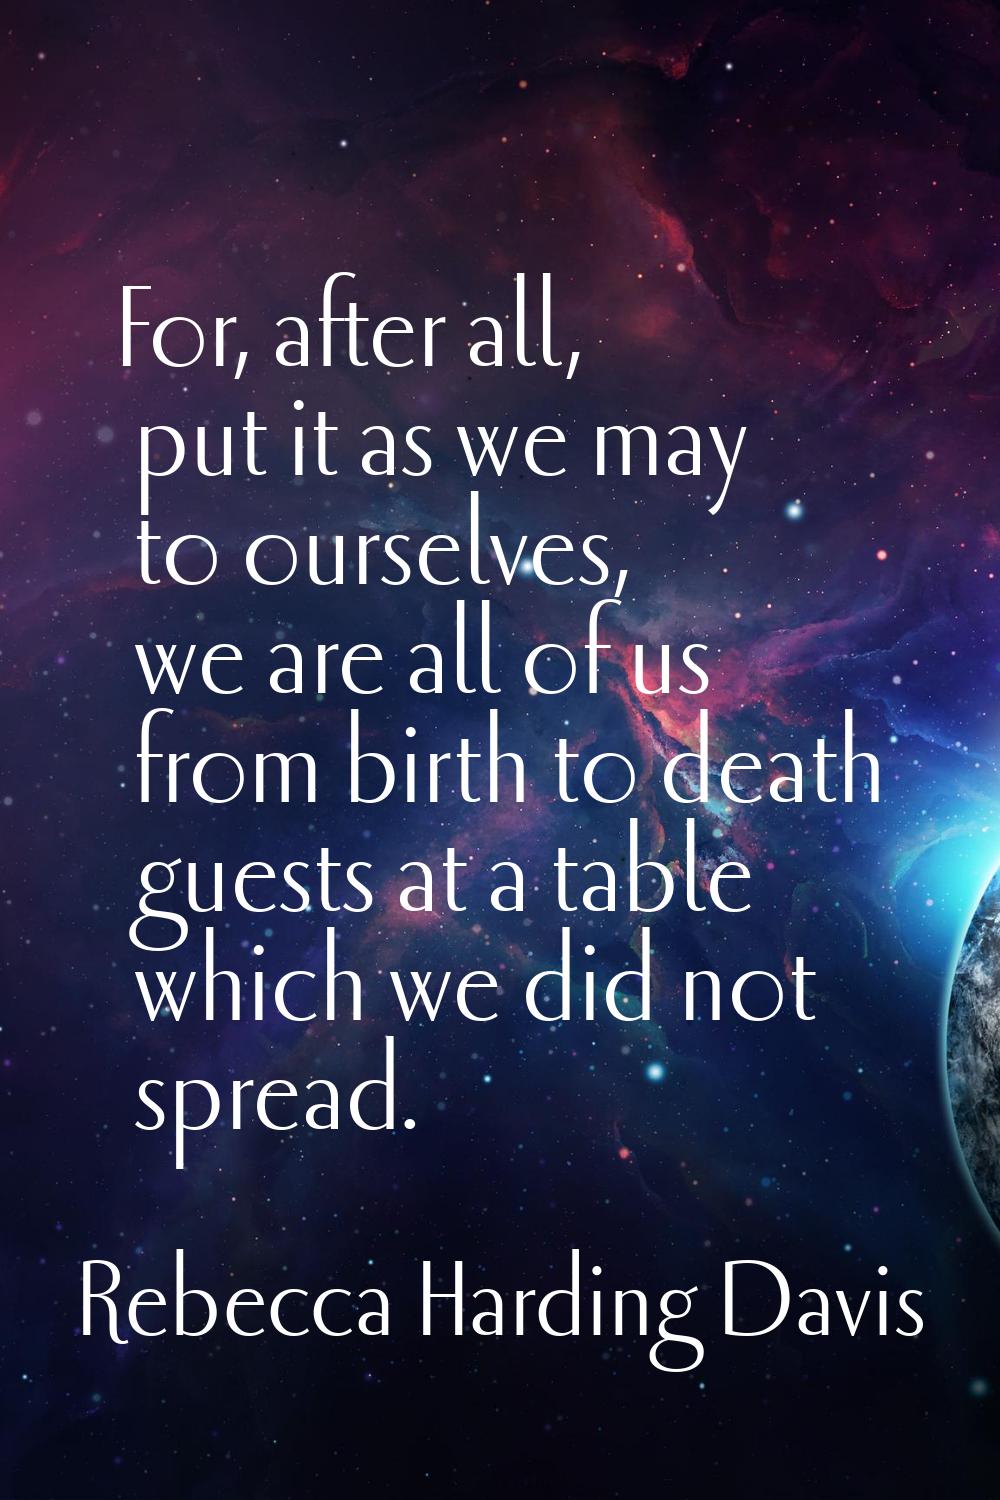 For, after all, put it as we may to ourselves, we are all of us from birth to death guests at a tab